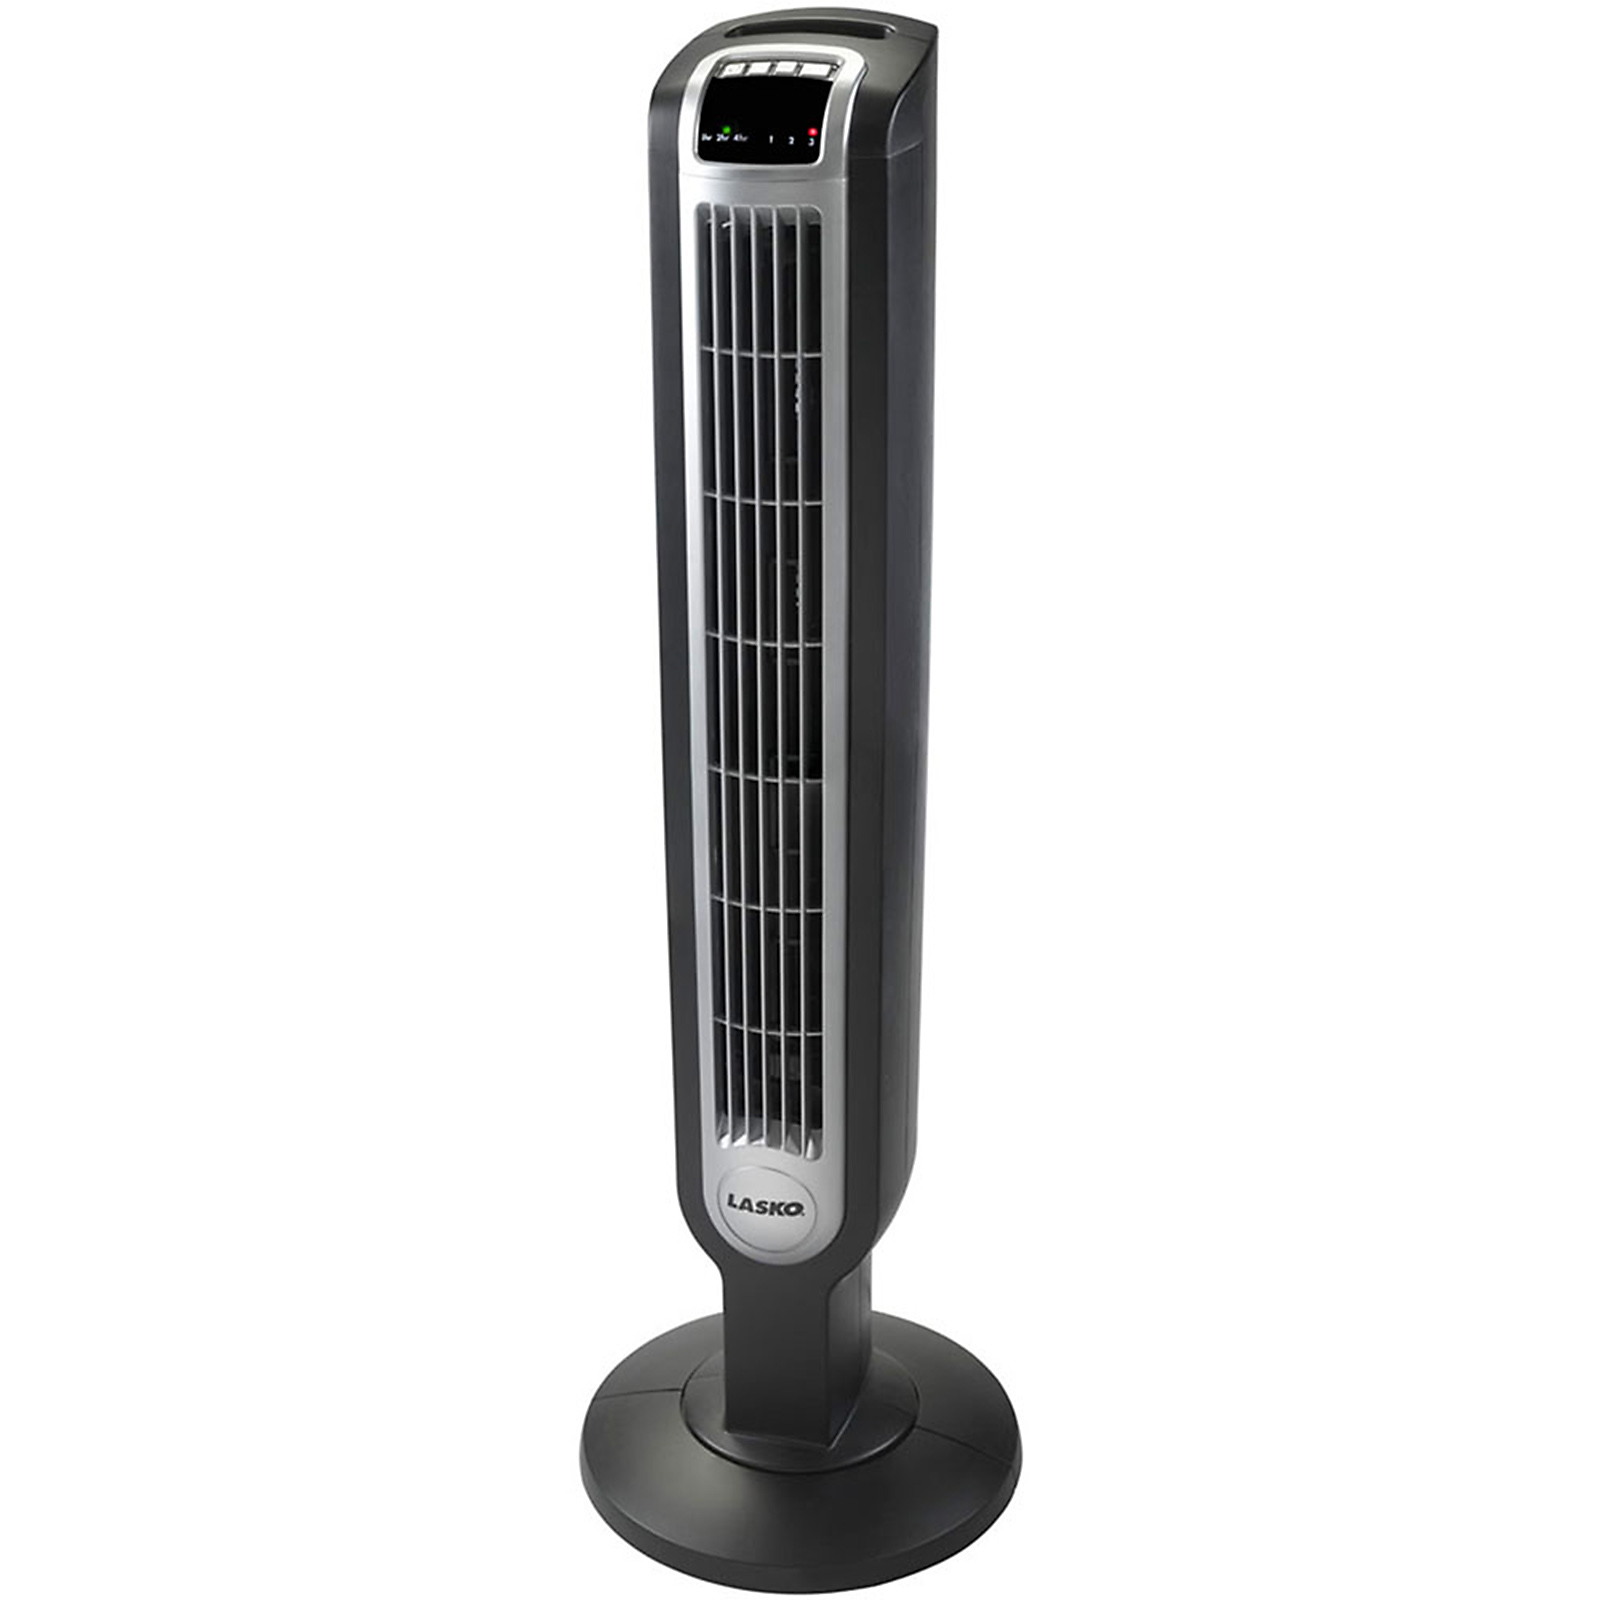 Lasko Products 2511 36 In. Tower Fan with Remote Control - Black